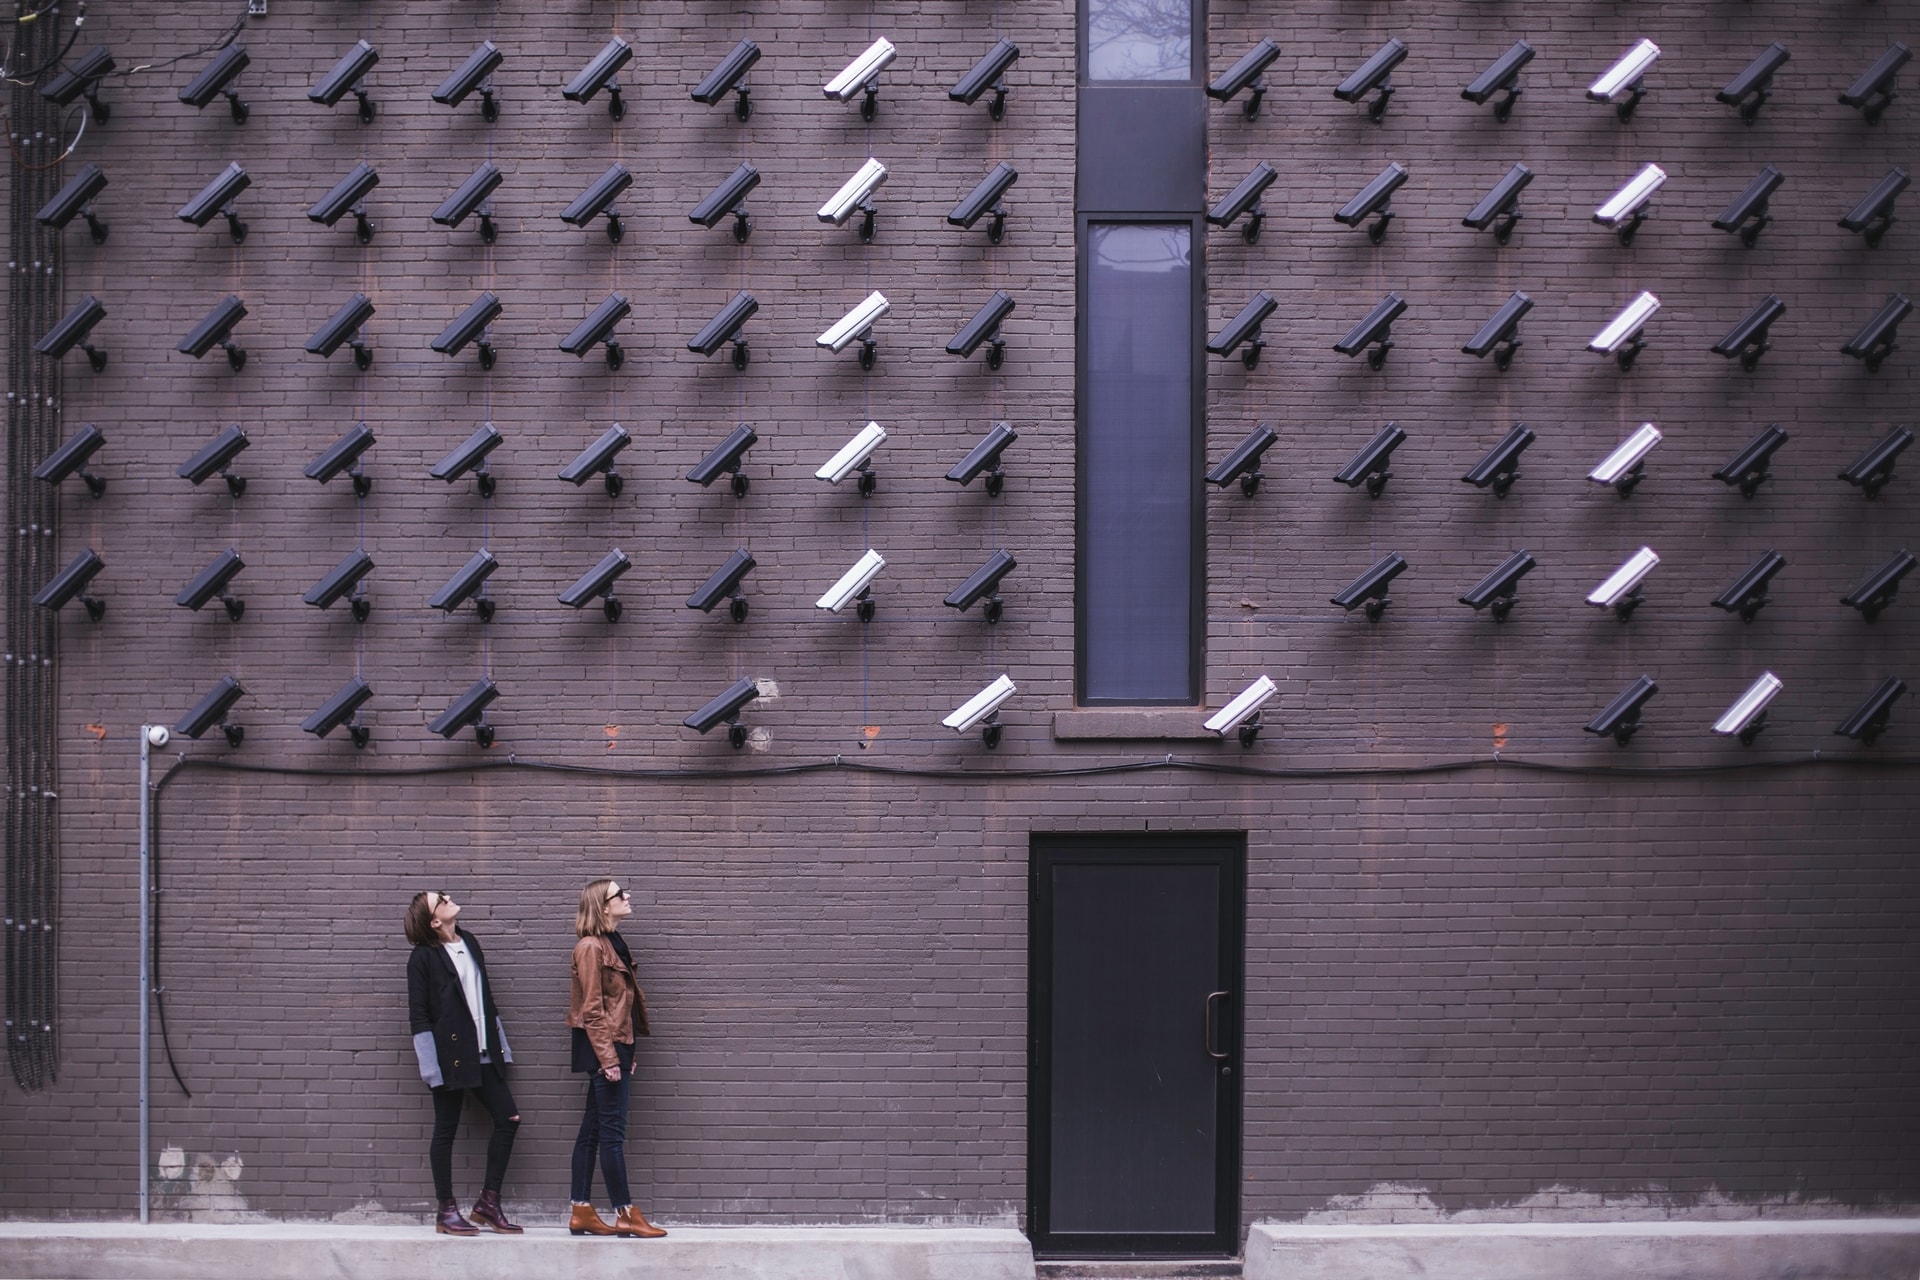 Wall of security cameras looking down on two women